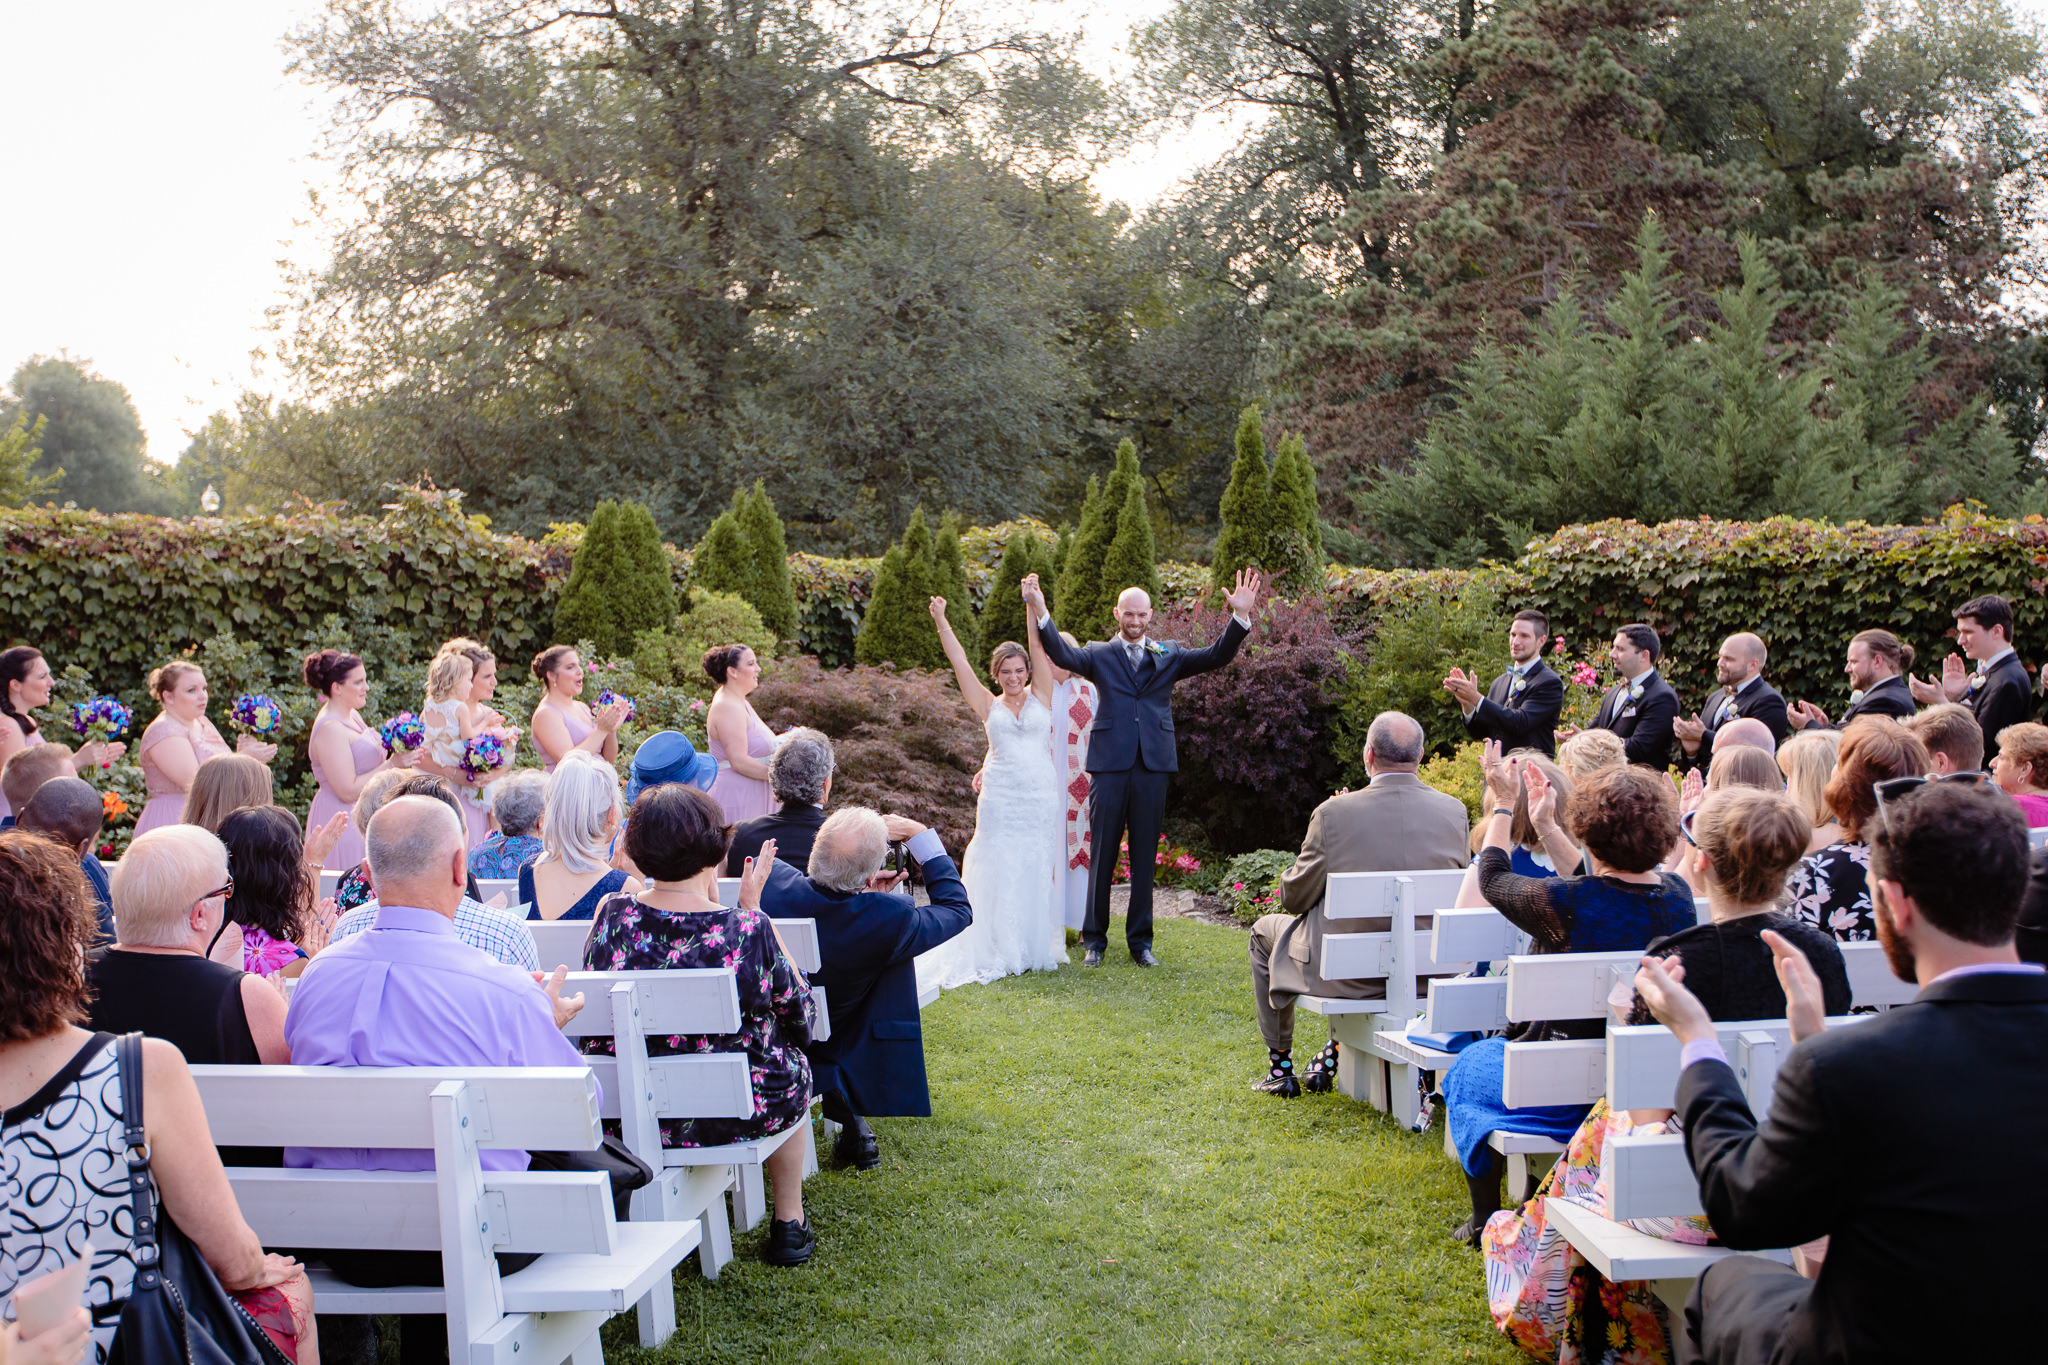 Newlyweds are pronounced husband and wife at an outdoor National Aviary wedding ceremony